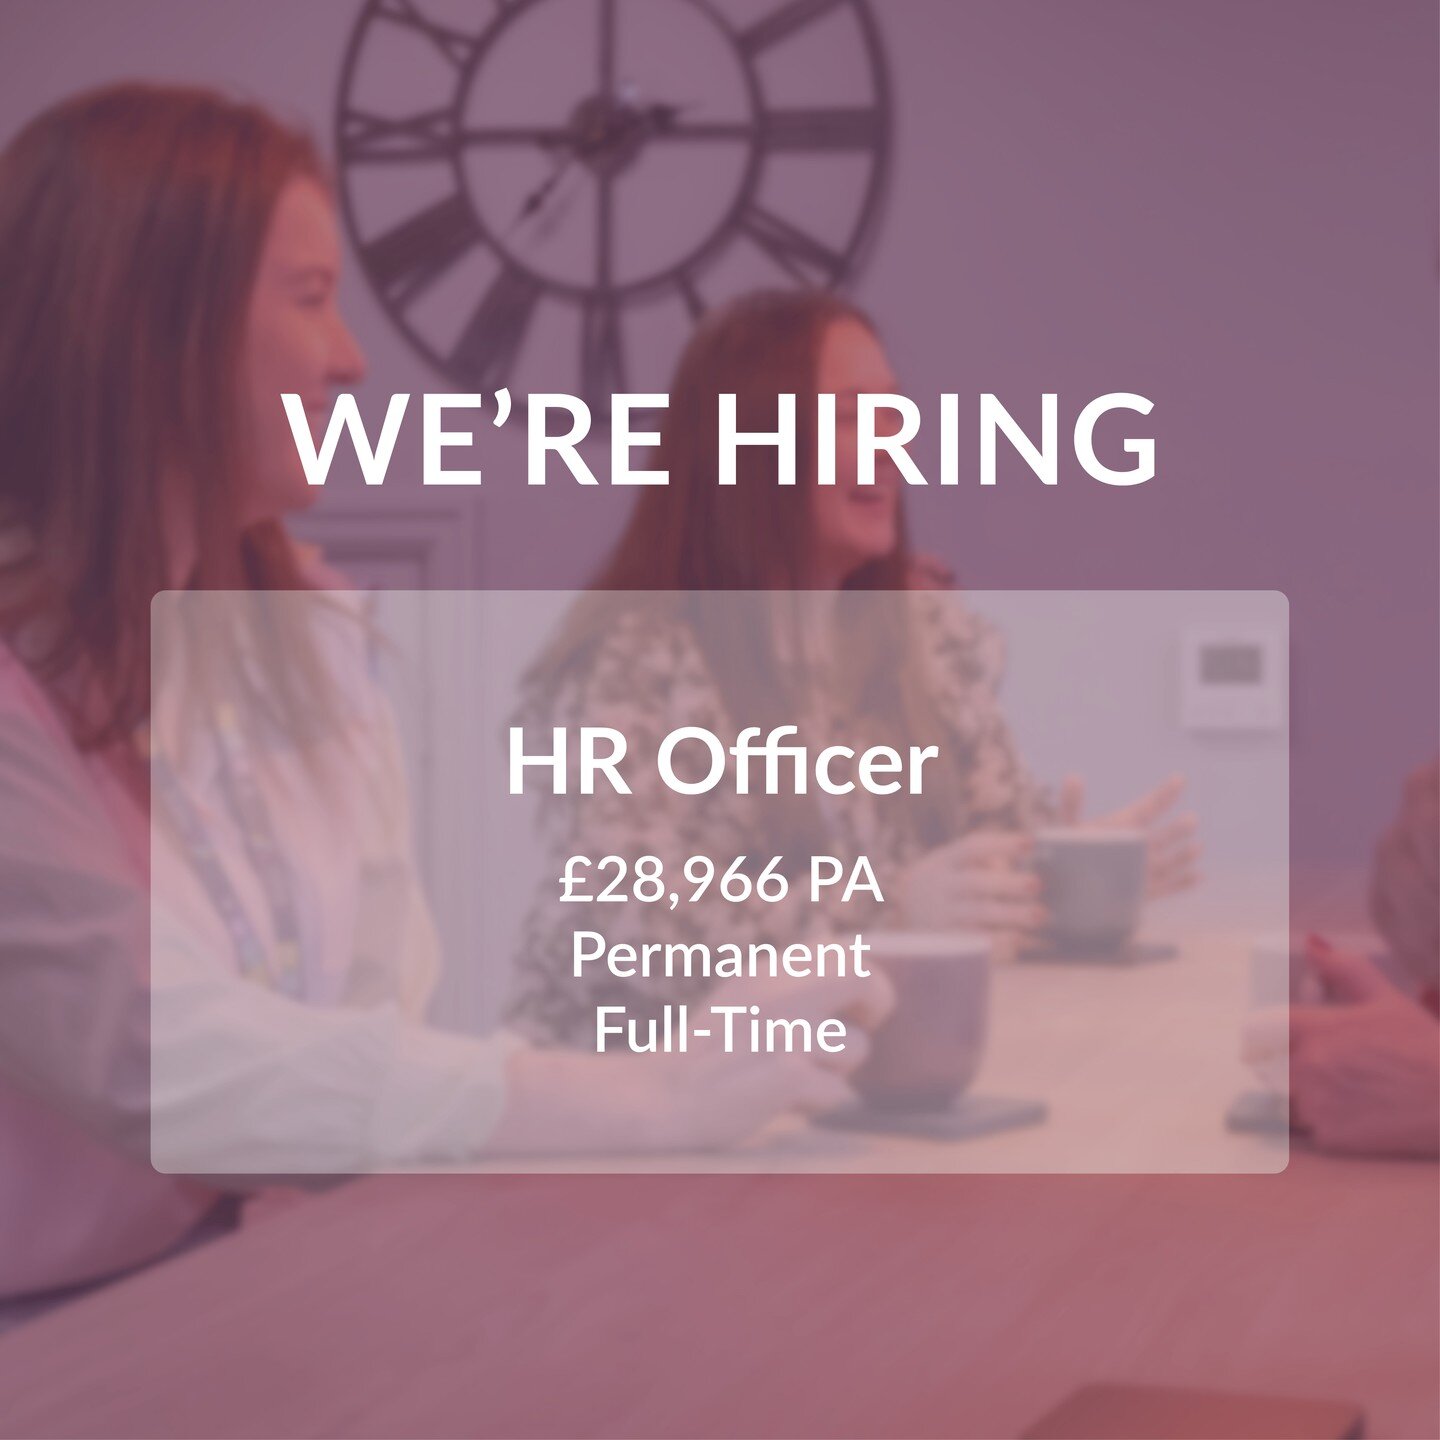 We're hiring. 📢

As HR Officer, you will provide professional, responsive and confidential administrative support to the Head of HR &amp; Group Services.

You will work to ensure the most suitable working environment for employees, focusing on best 